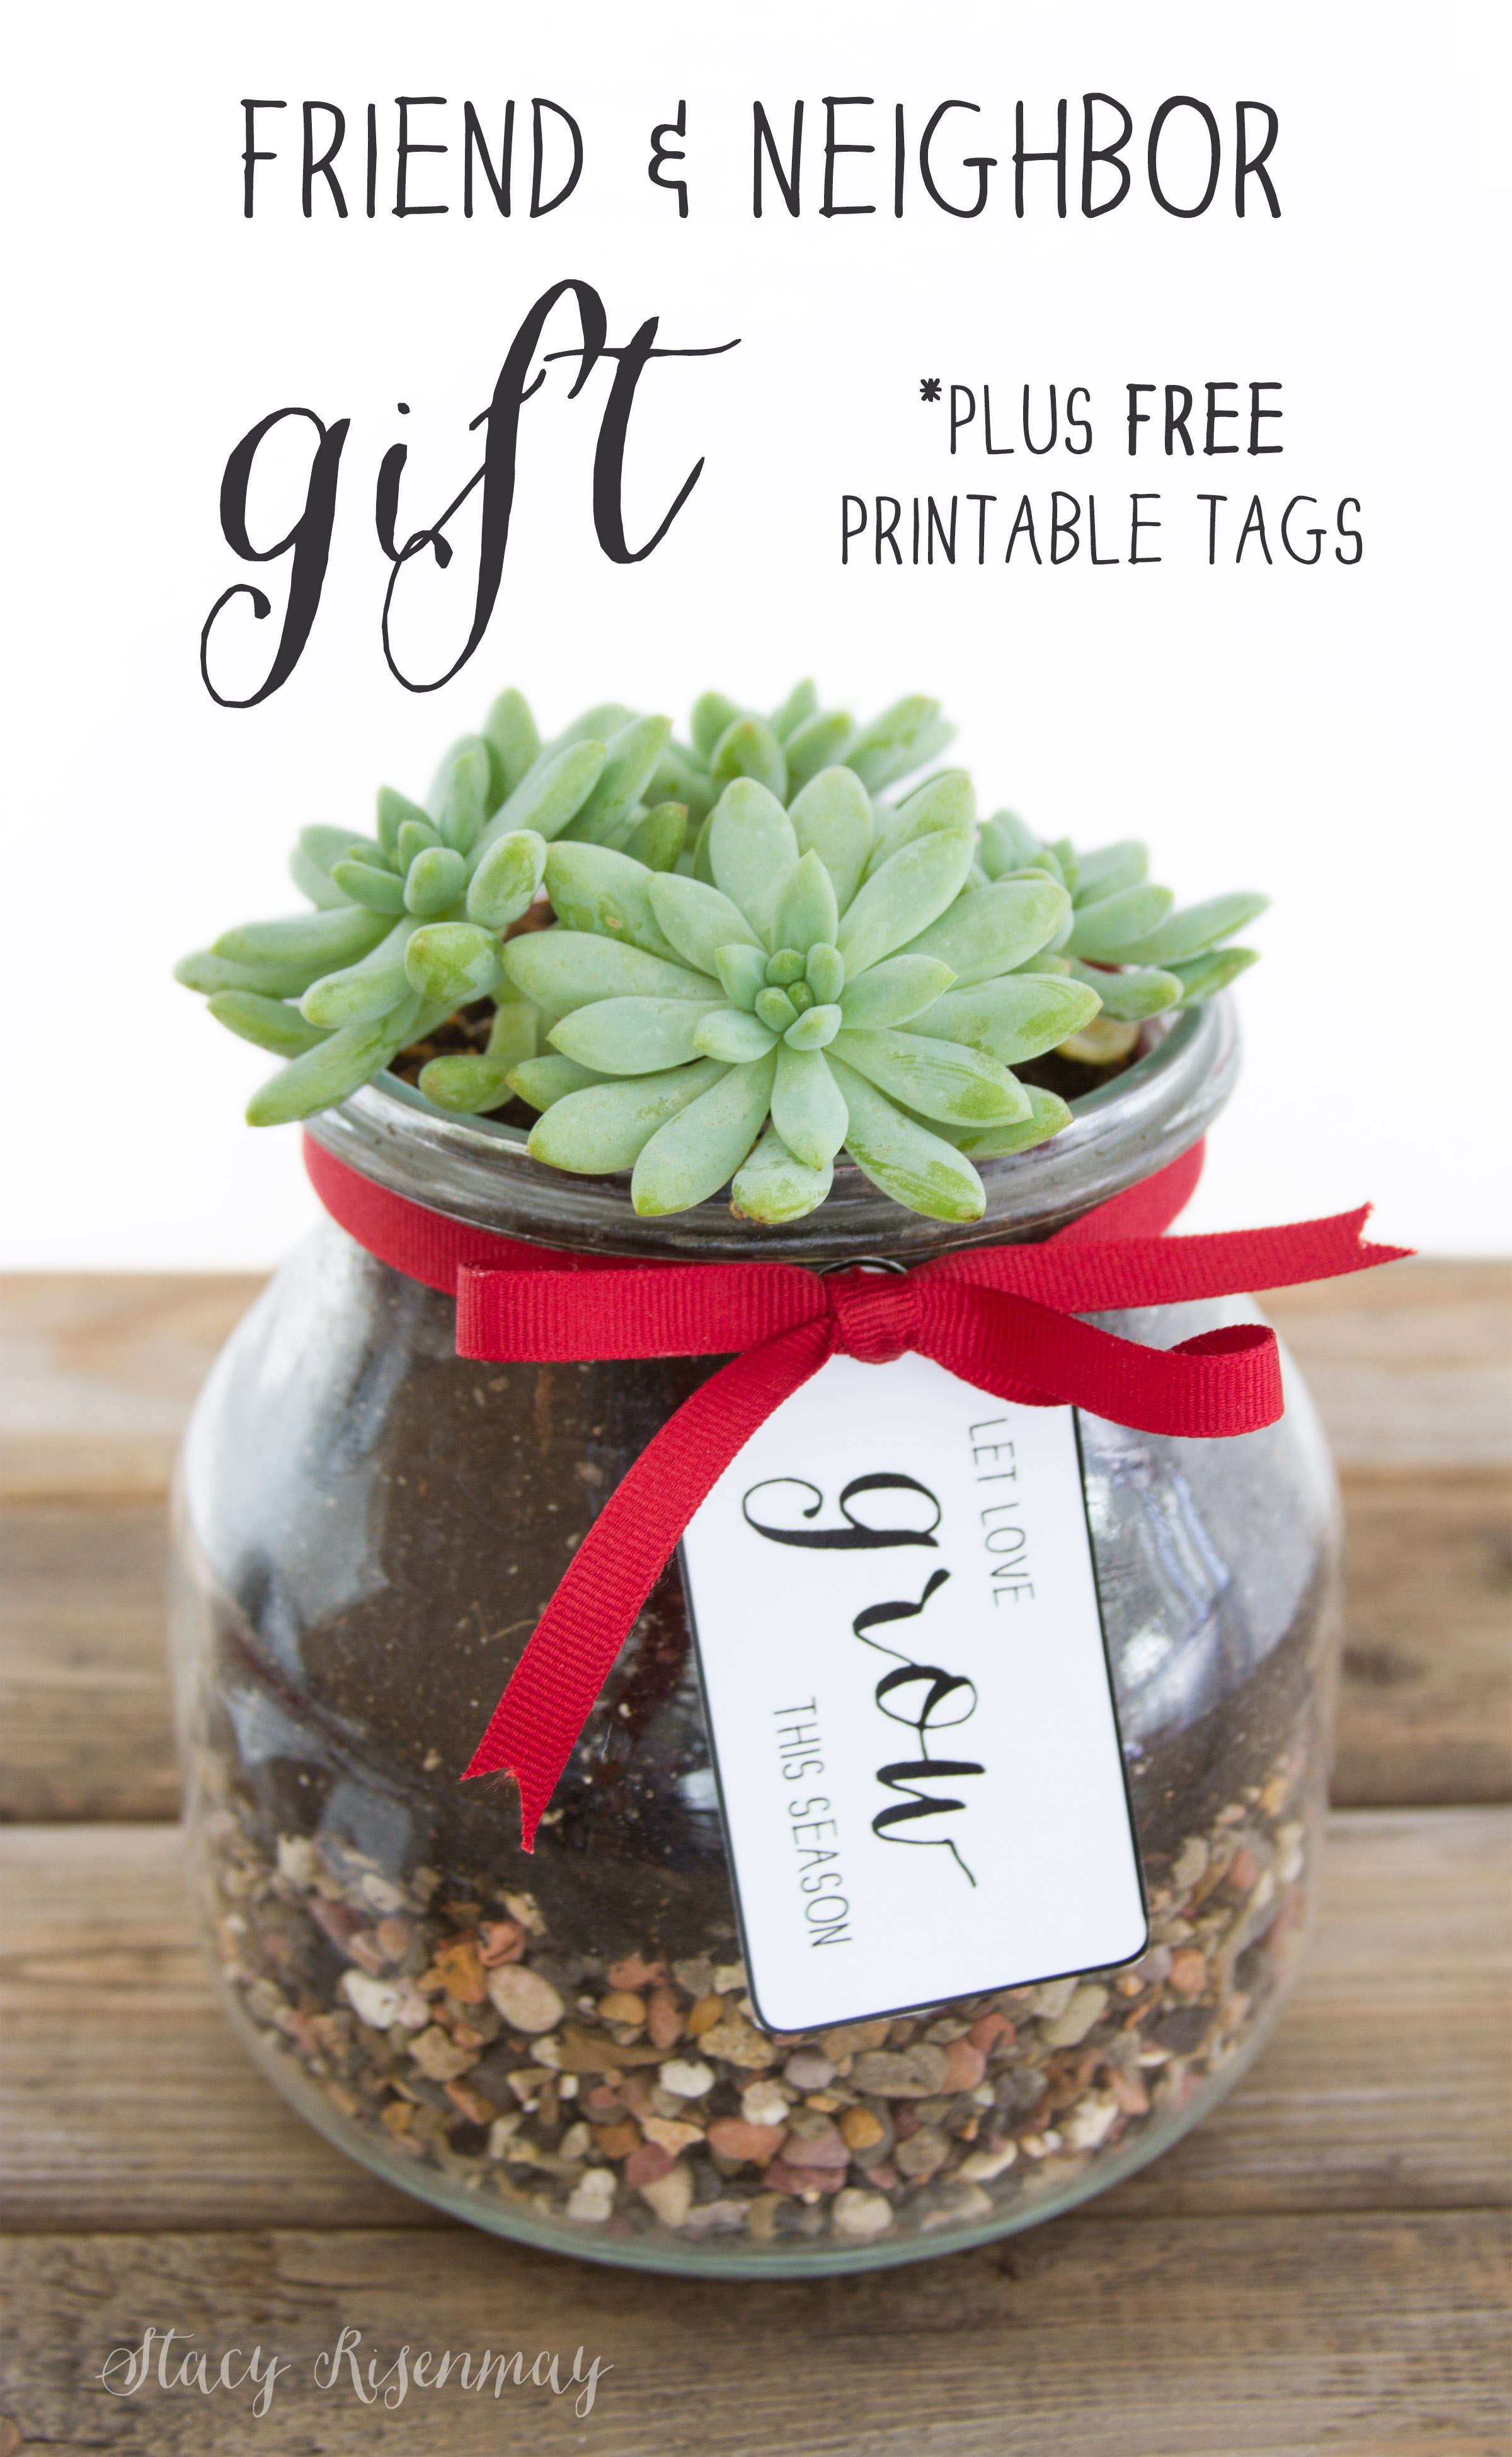 http://www.notjustahousewife.net/wp-content/uploads/2015/11/free-printable-tags.jpg